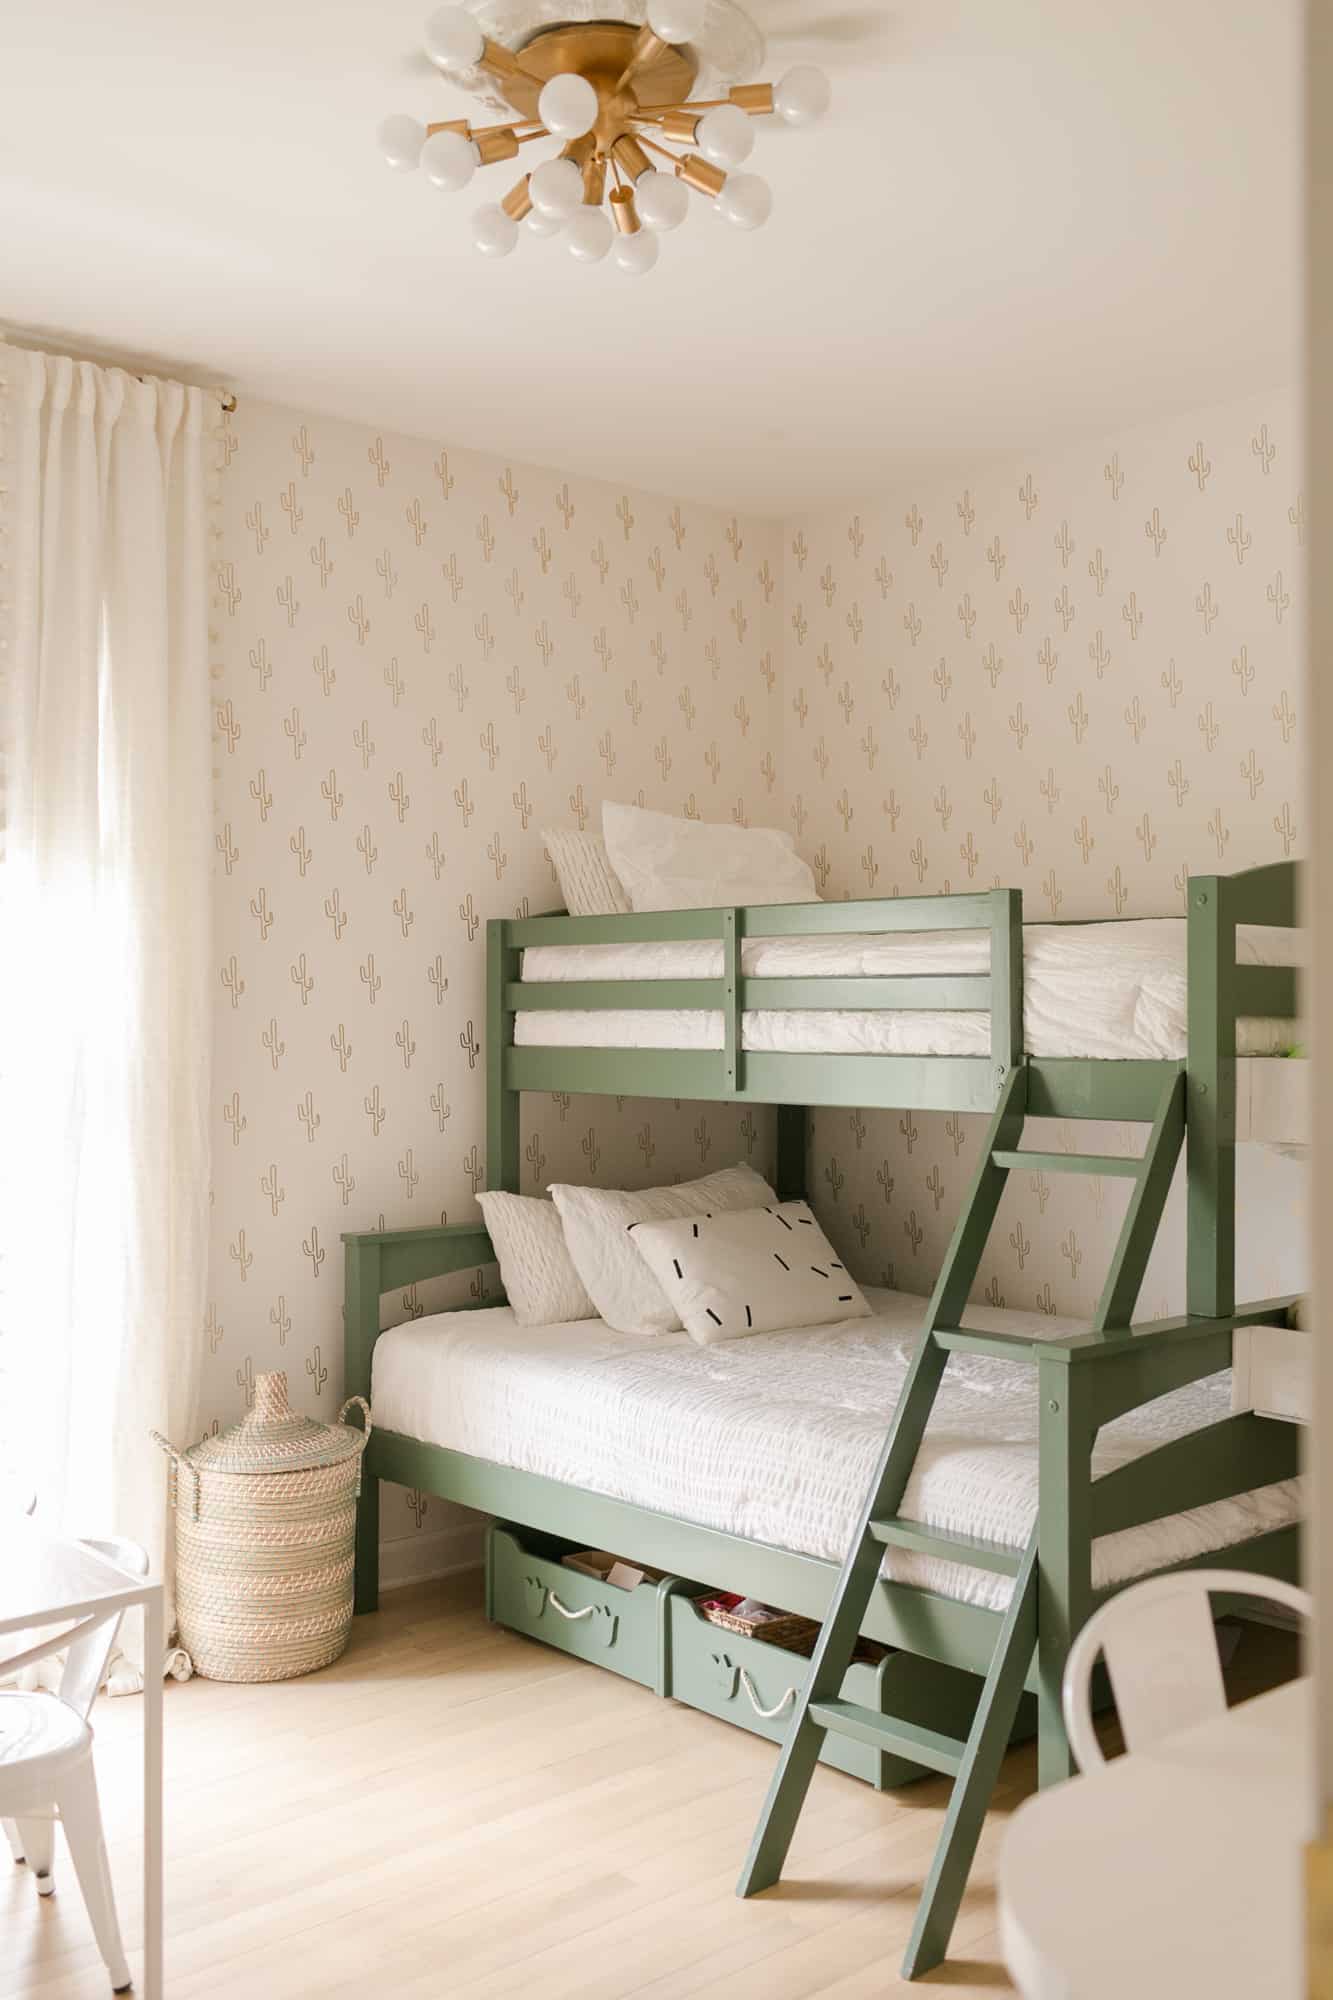 Kiddo Guest Playroom Update A, Bunk Bed Guest Room